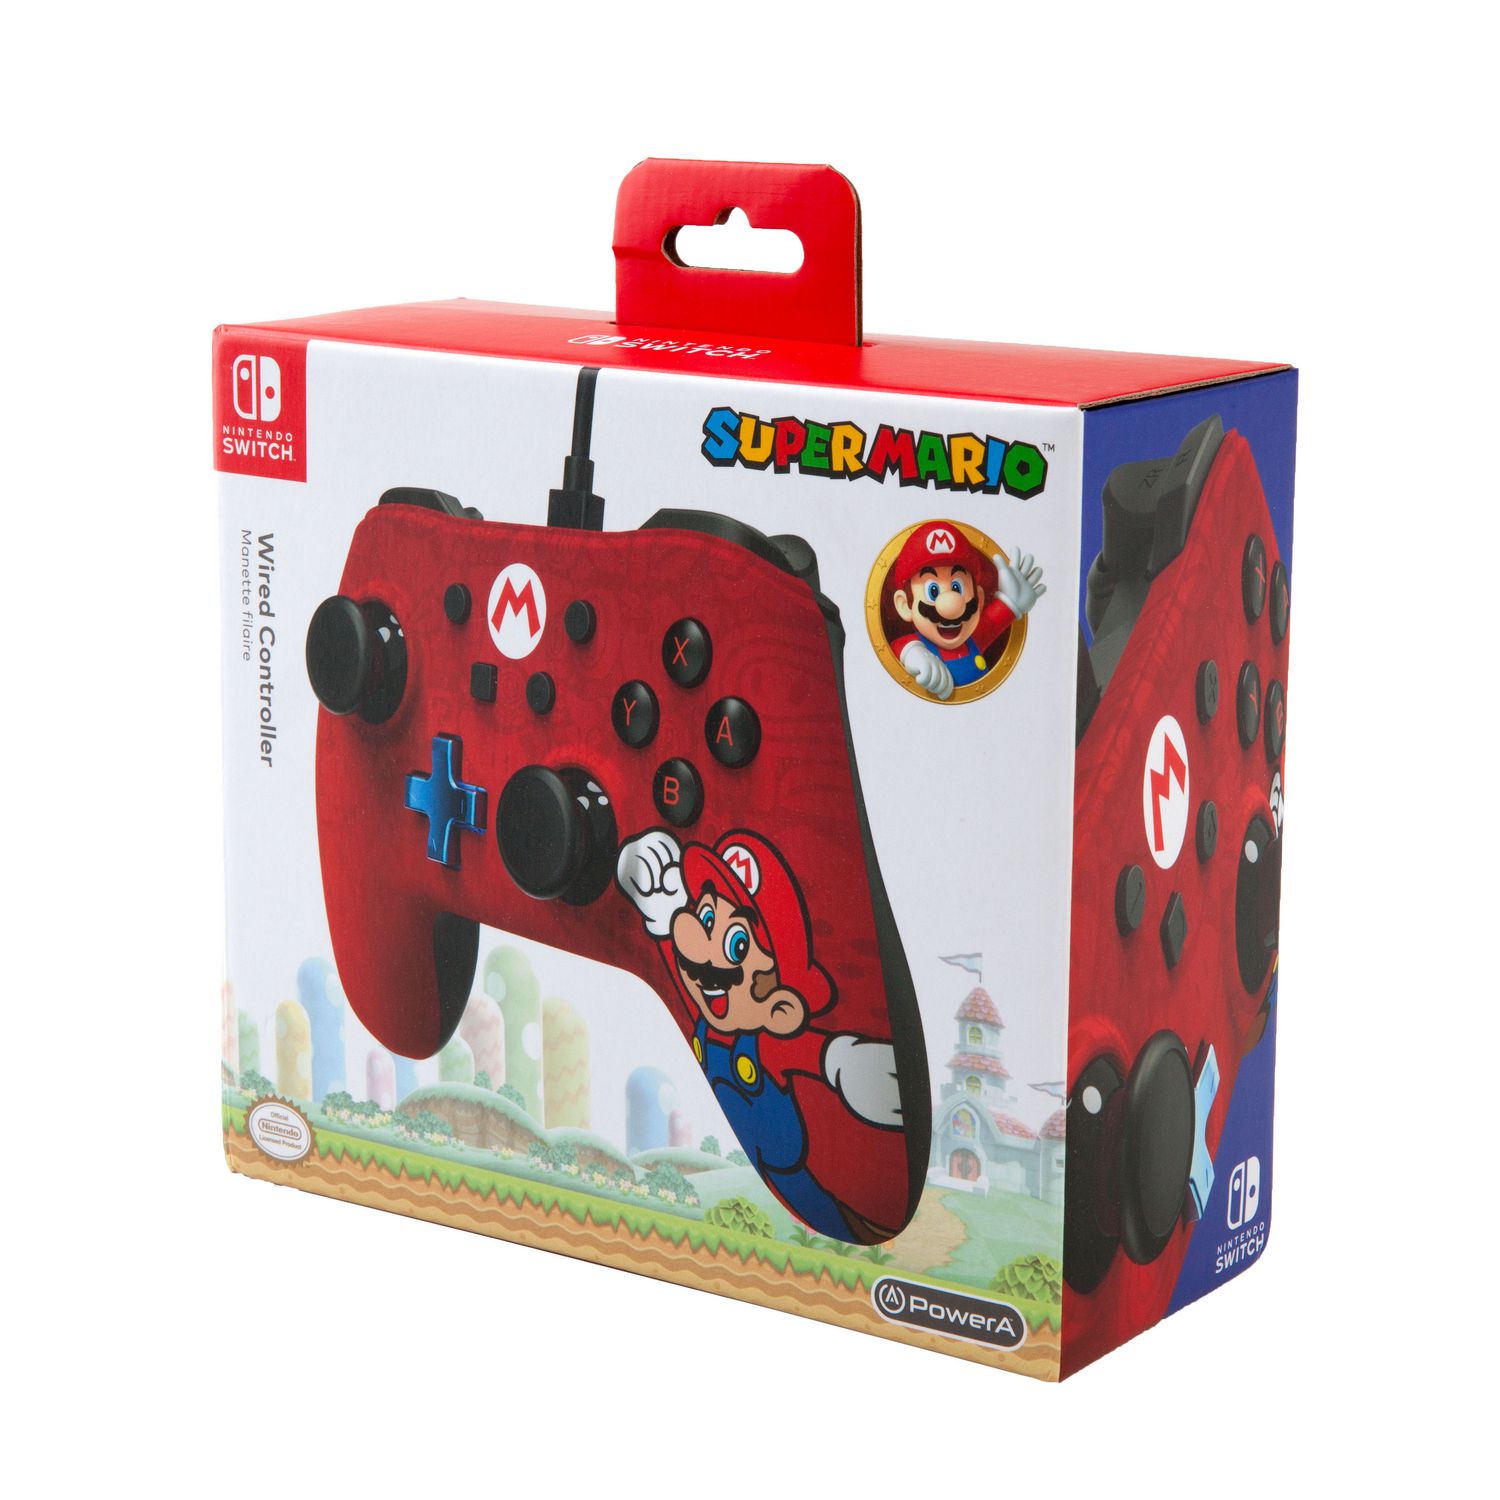 nintendo switch mario controller wired